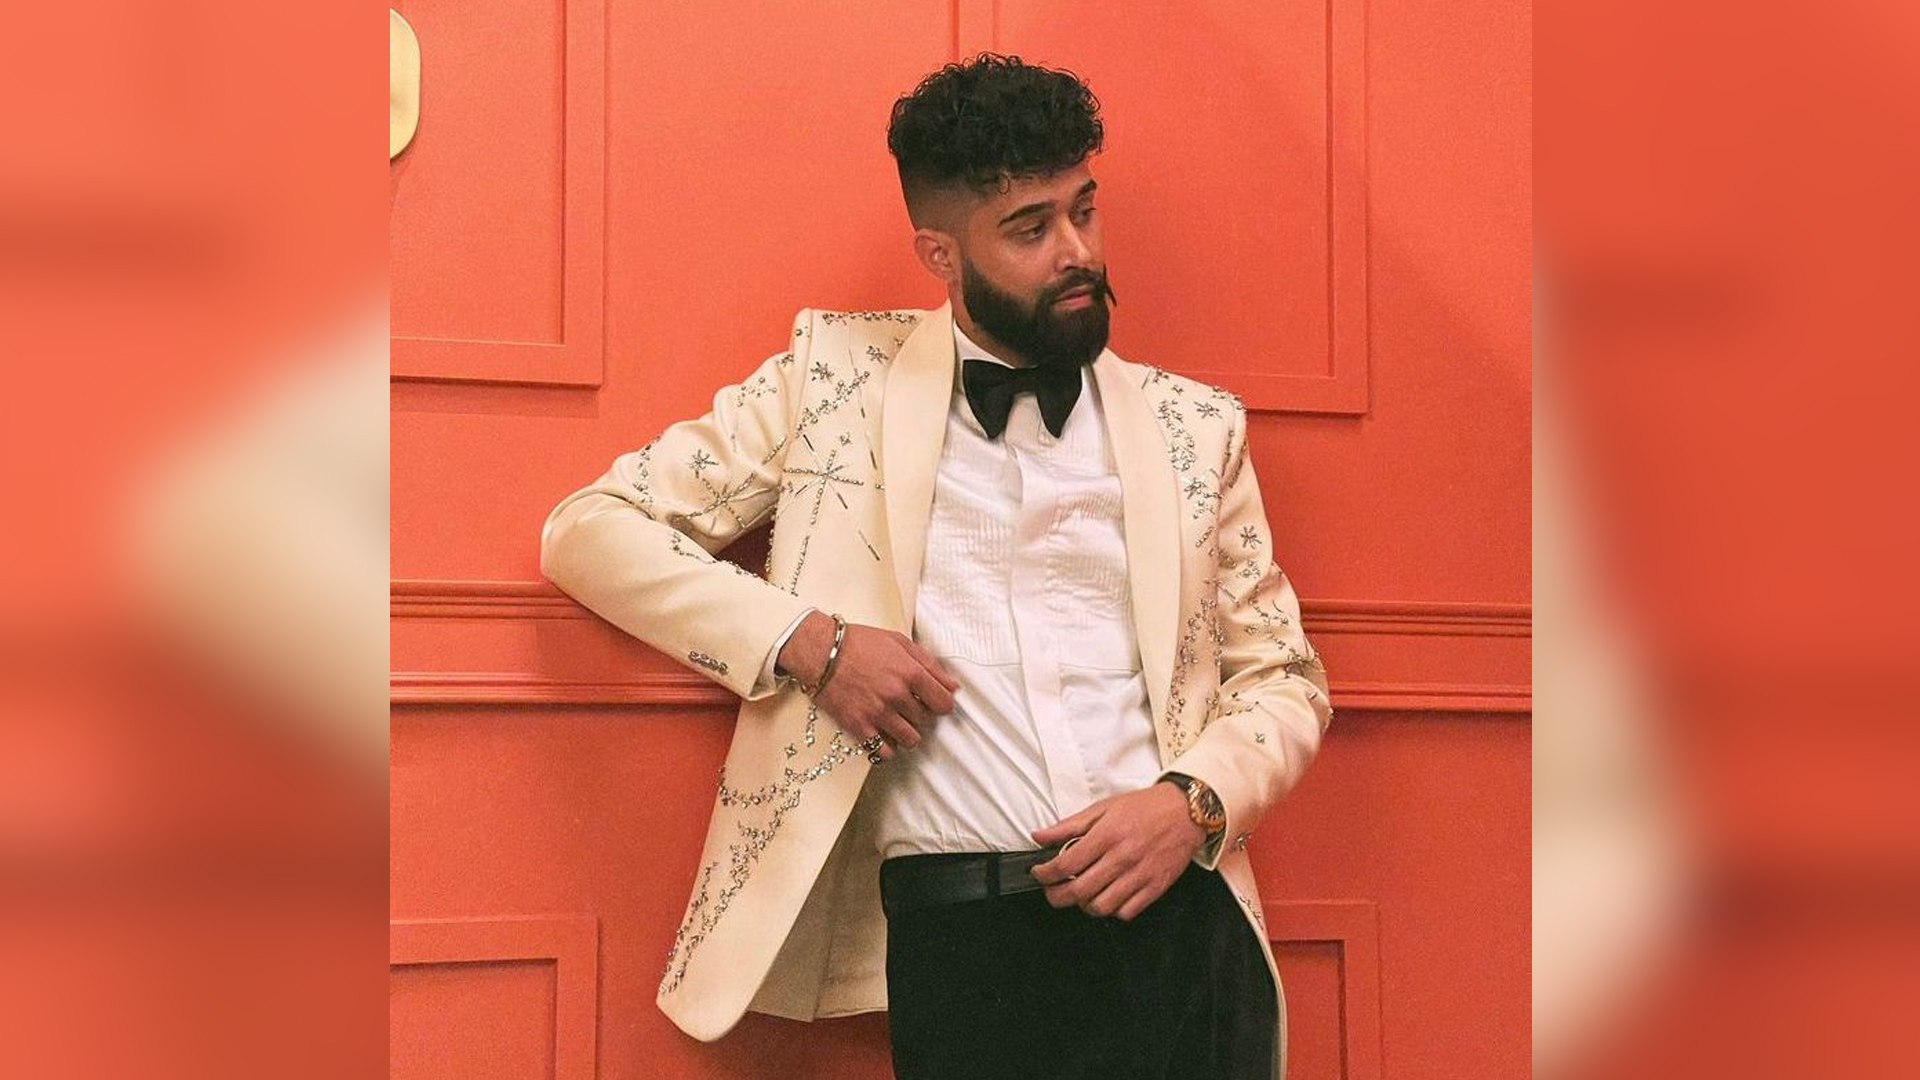 AP Dhillon soars high on Spotify, courtesy his new single, ‘With You’